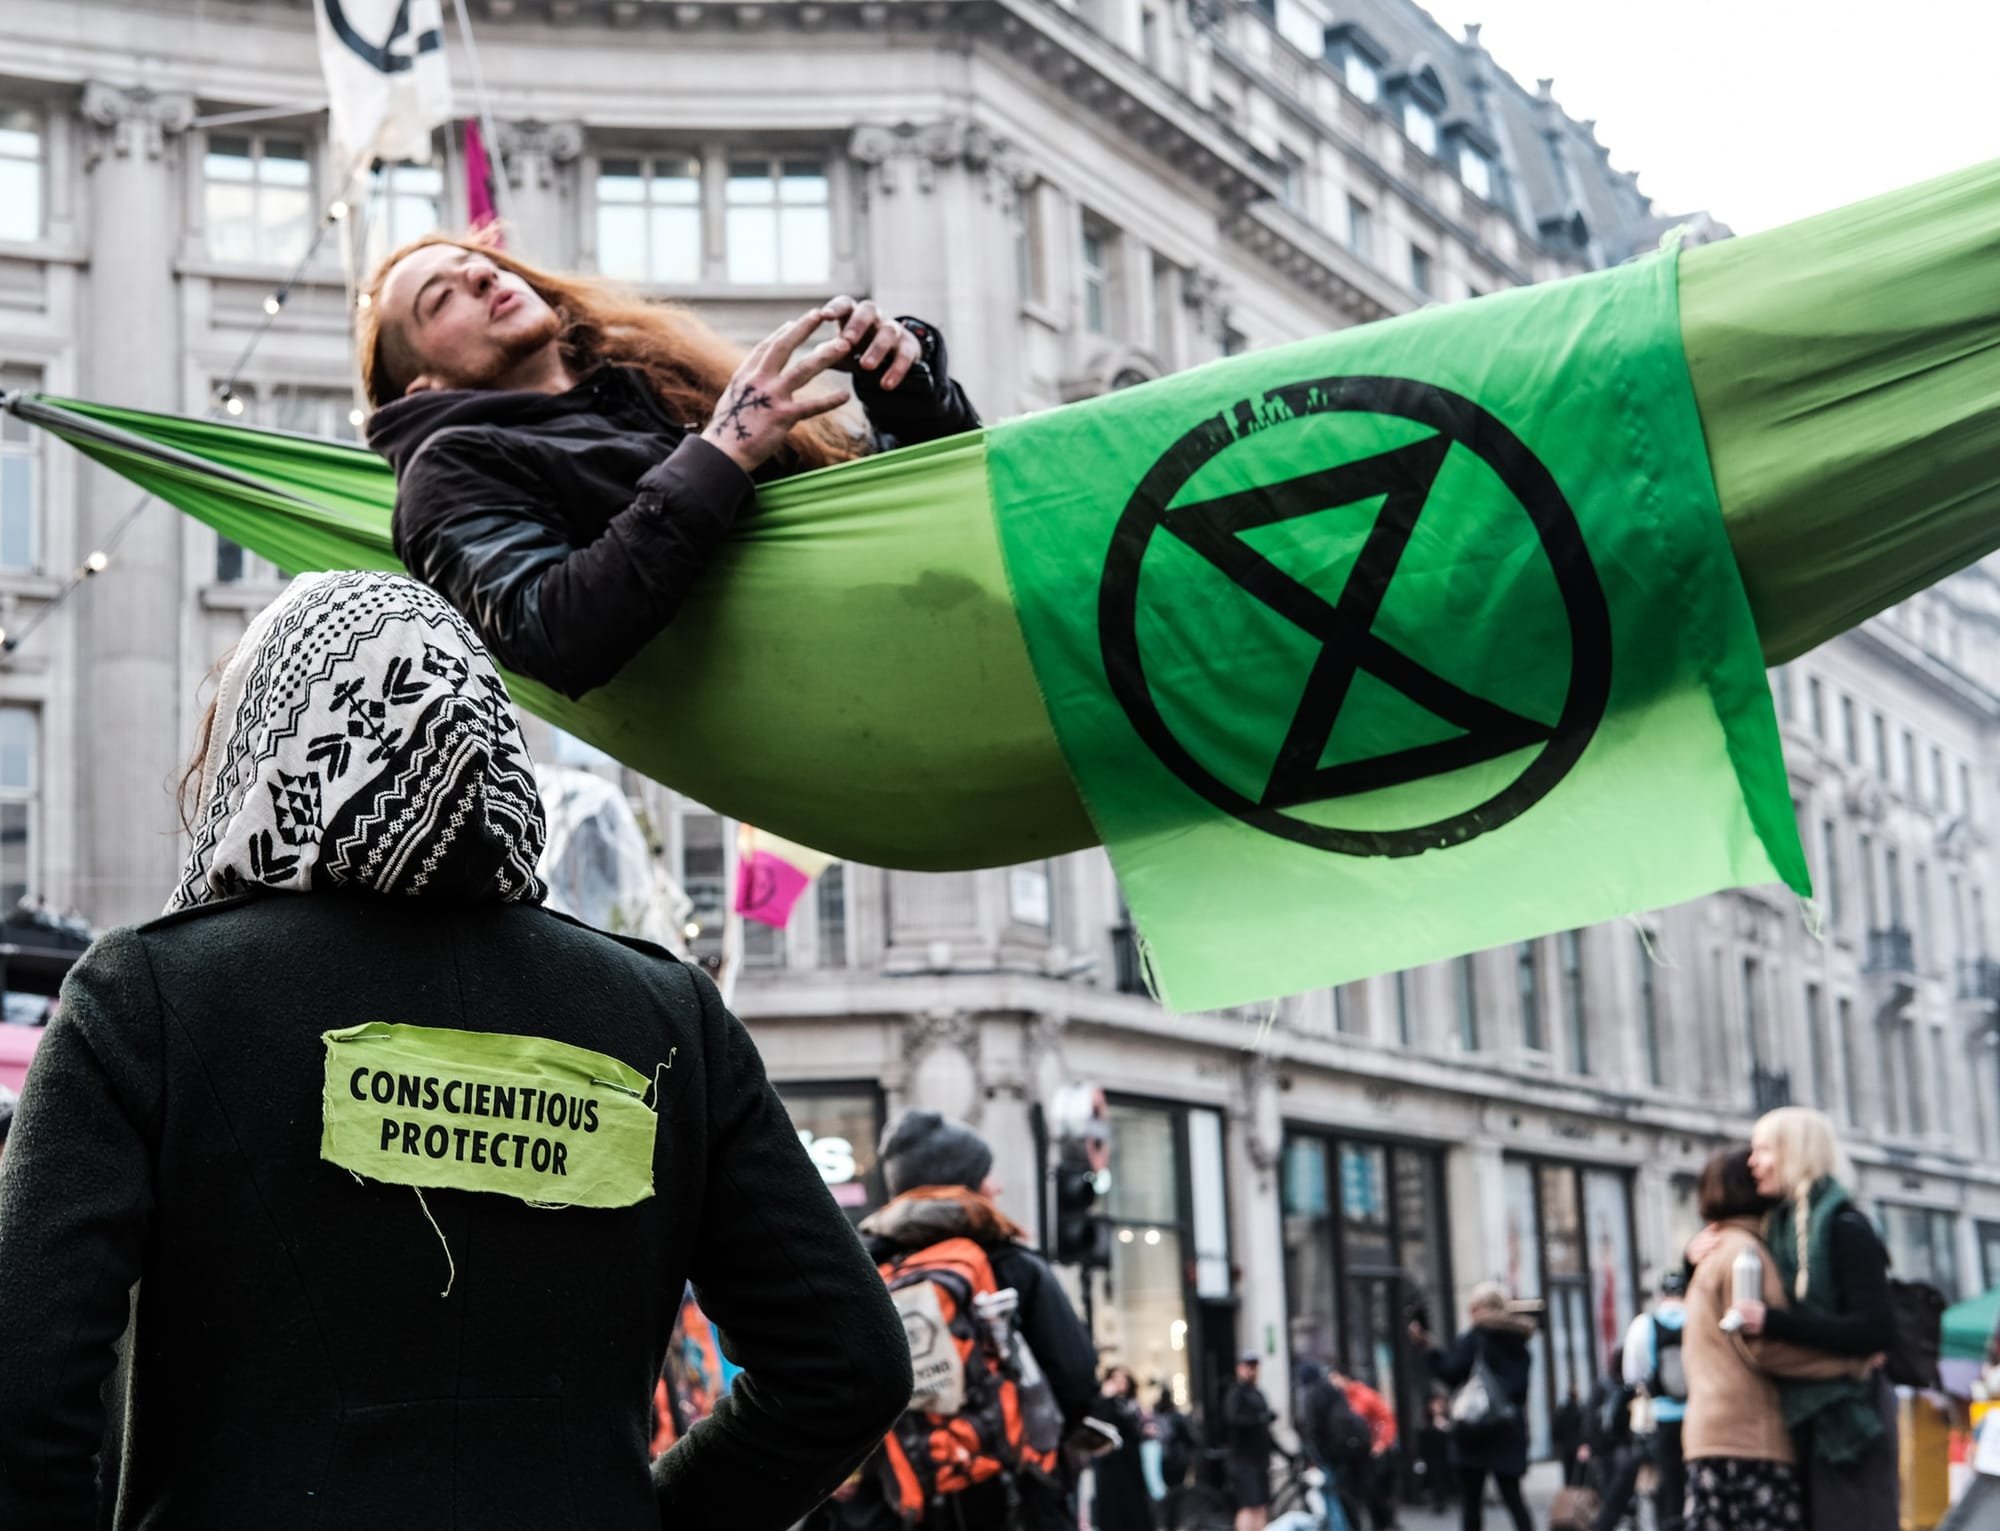 Real Greens v Fake Greens: An Investigation into the Green Movement